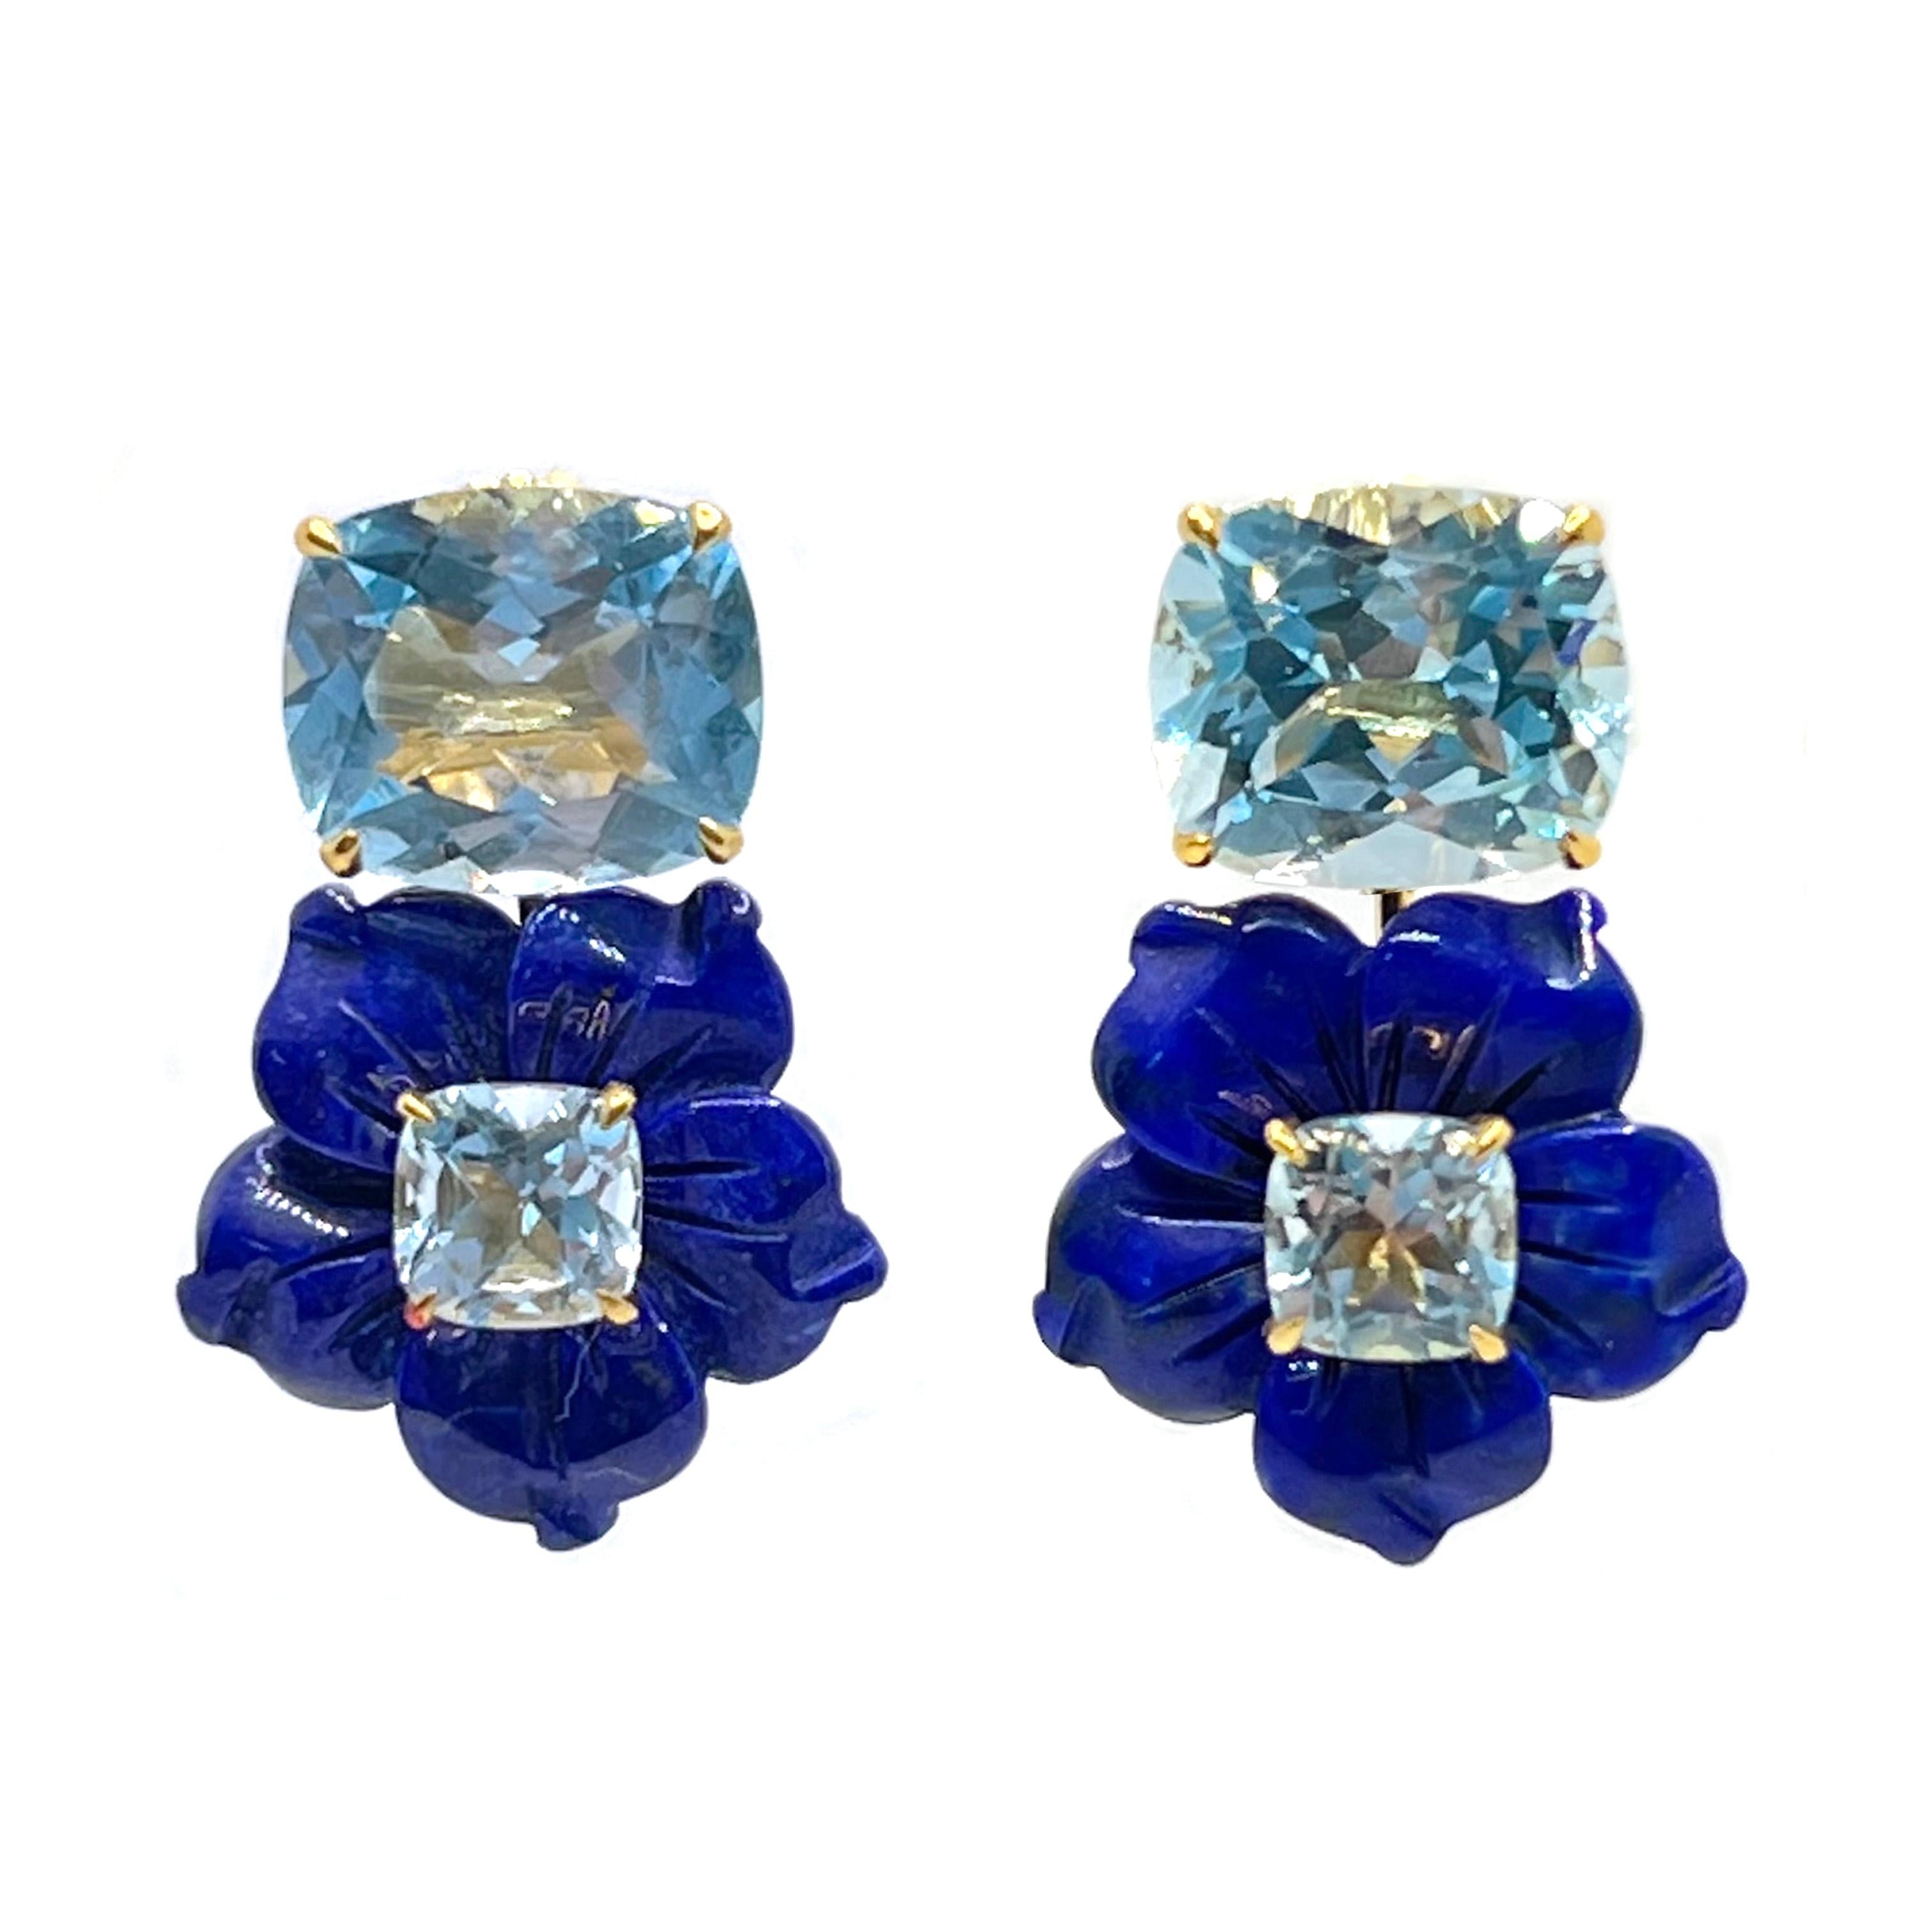 Bijoux Num Cushion-cut Blue Topaz and Carved Lapis Lazuli Flower Drop Earrings

This gorgeous pair of earrings features beautiful cushion-cut sky blue topaz,  18mm blue lapis lazuli carved into beautiful three dimension flower with cushion-cut sky